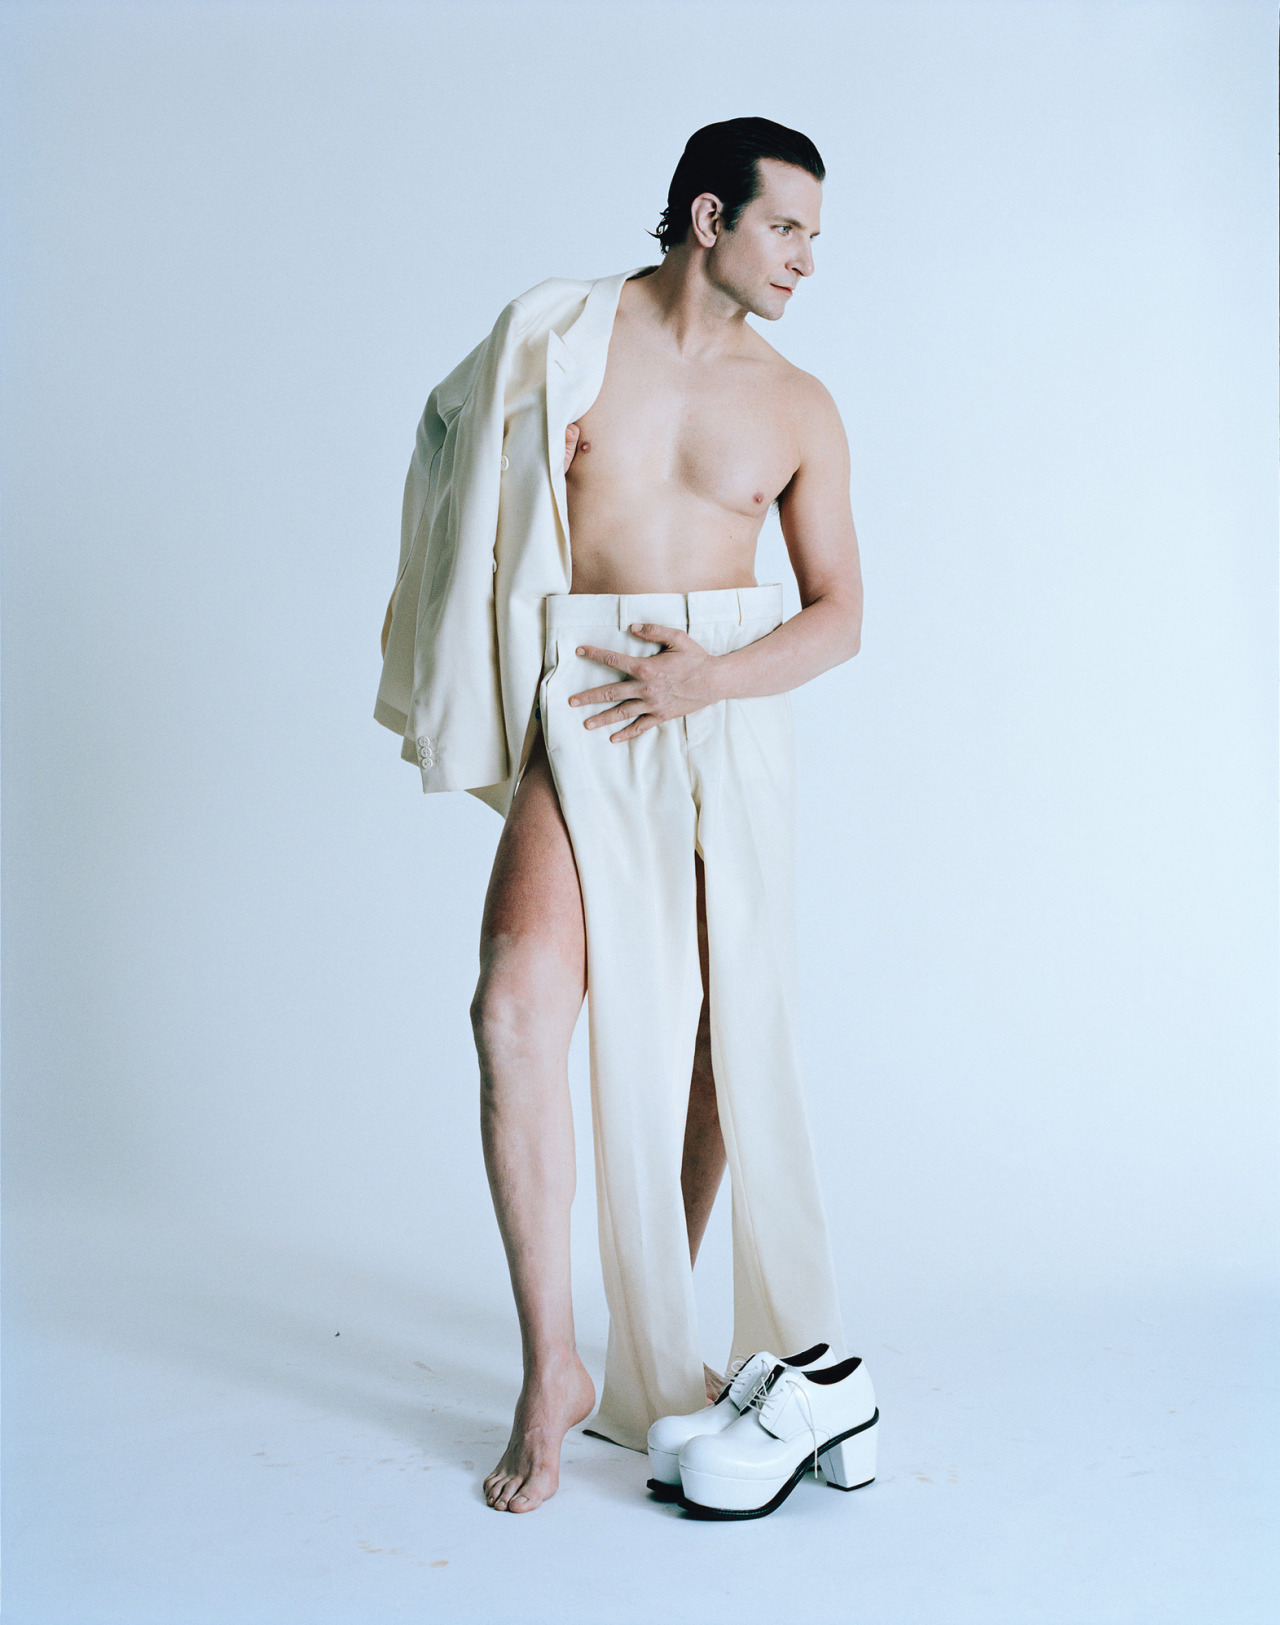 The Birthday Boy in His Birthday Suit 
Photograph by Tim Walker; styled by Jacob K; W magazine February 2015. 